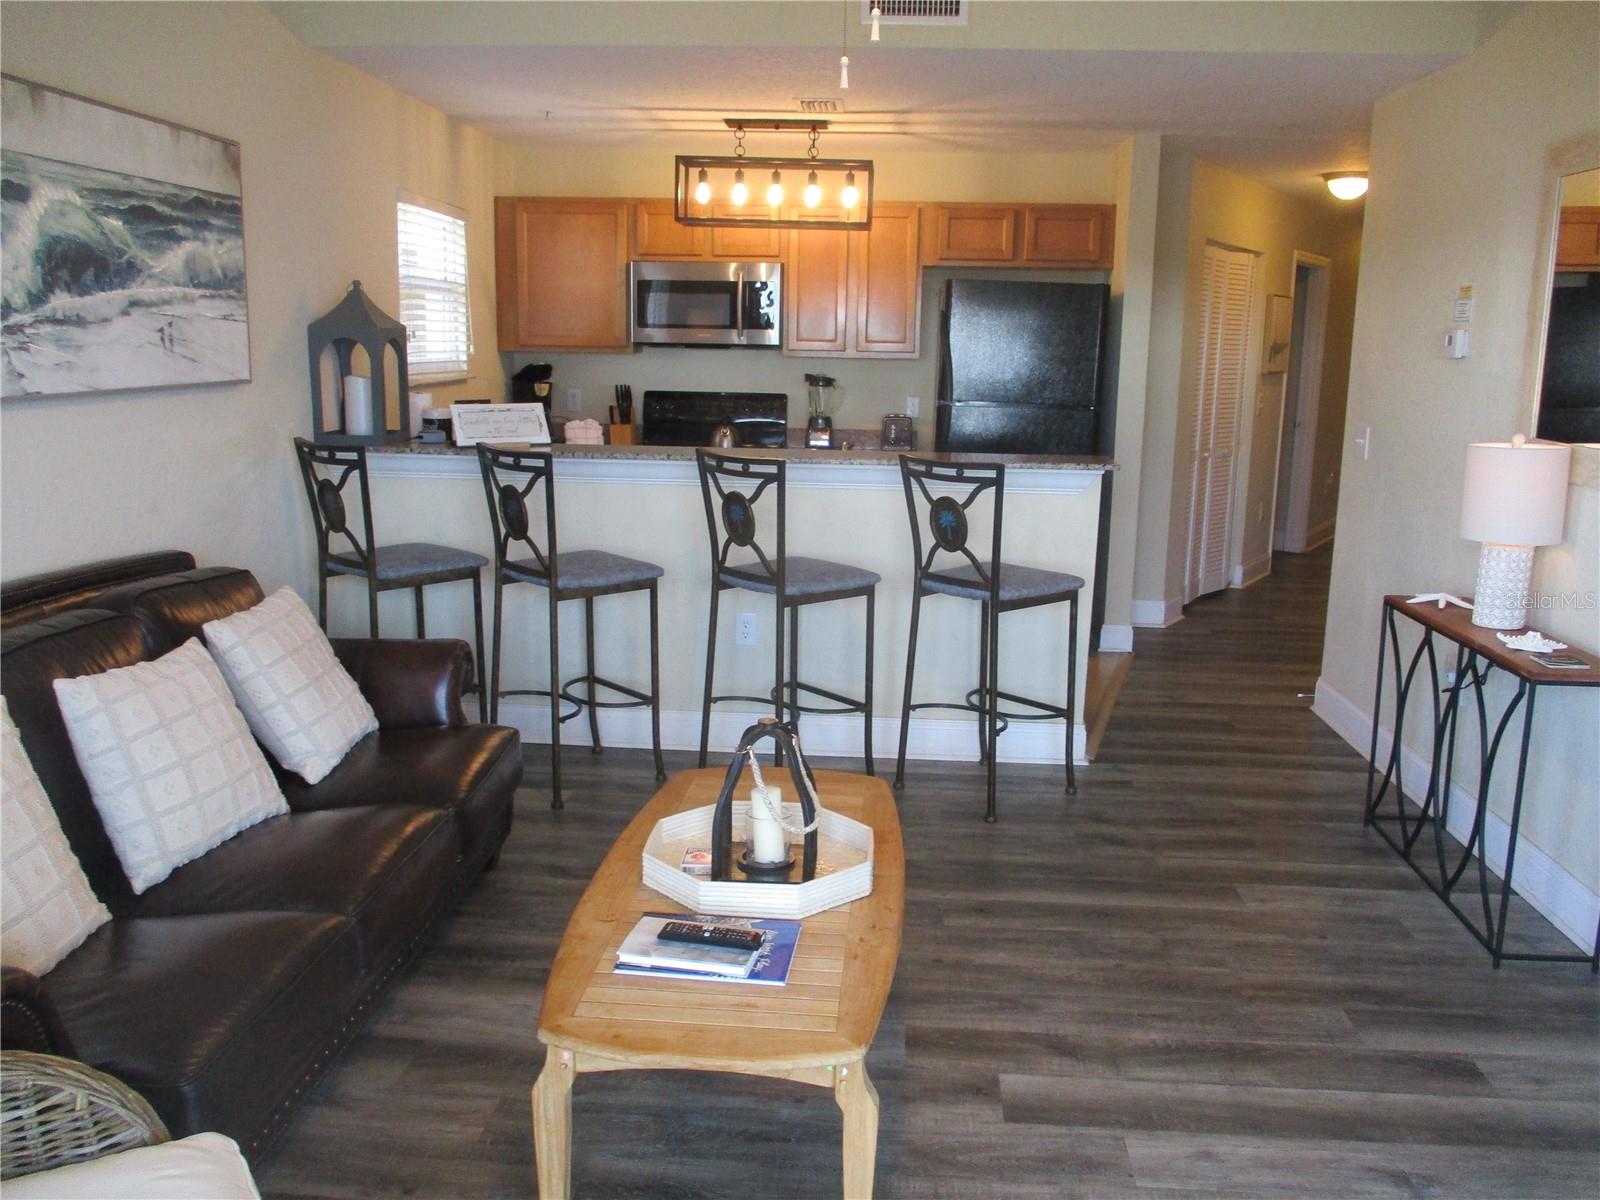 All newer Luxury vinyl flooring throughout the unit. Ceramic tiles in the kitchen and Baths.